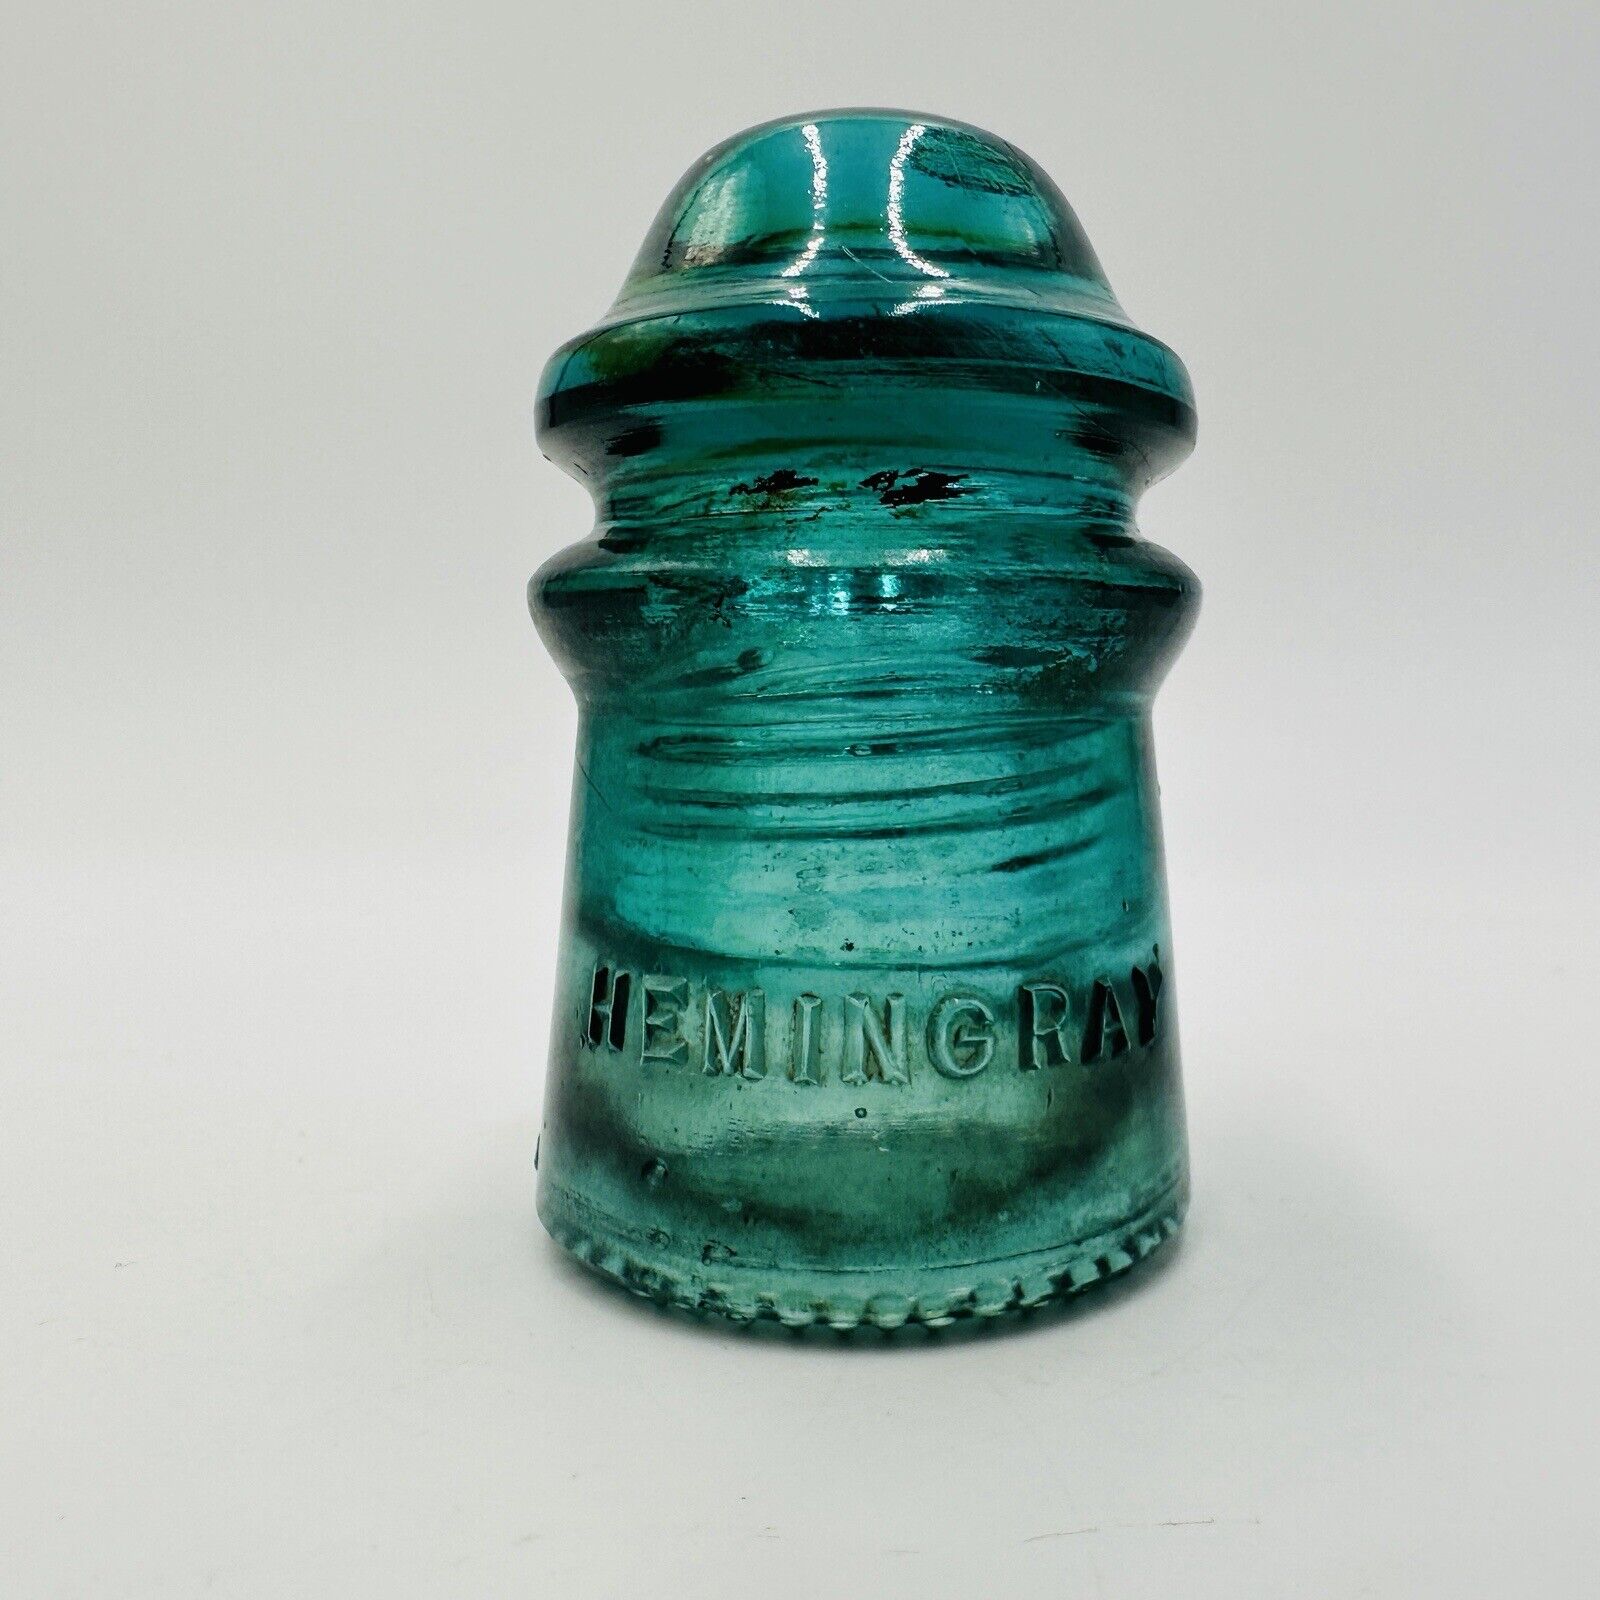 Hemingray Glass Insulator NO 9 Turquoise Early 1893-1895 Embossed Antique